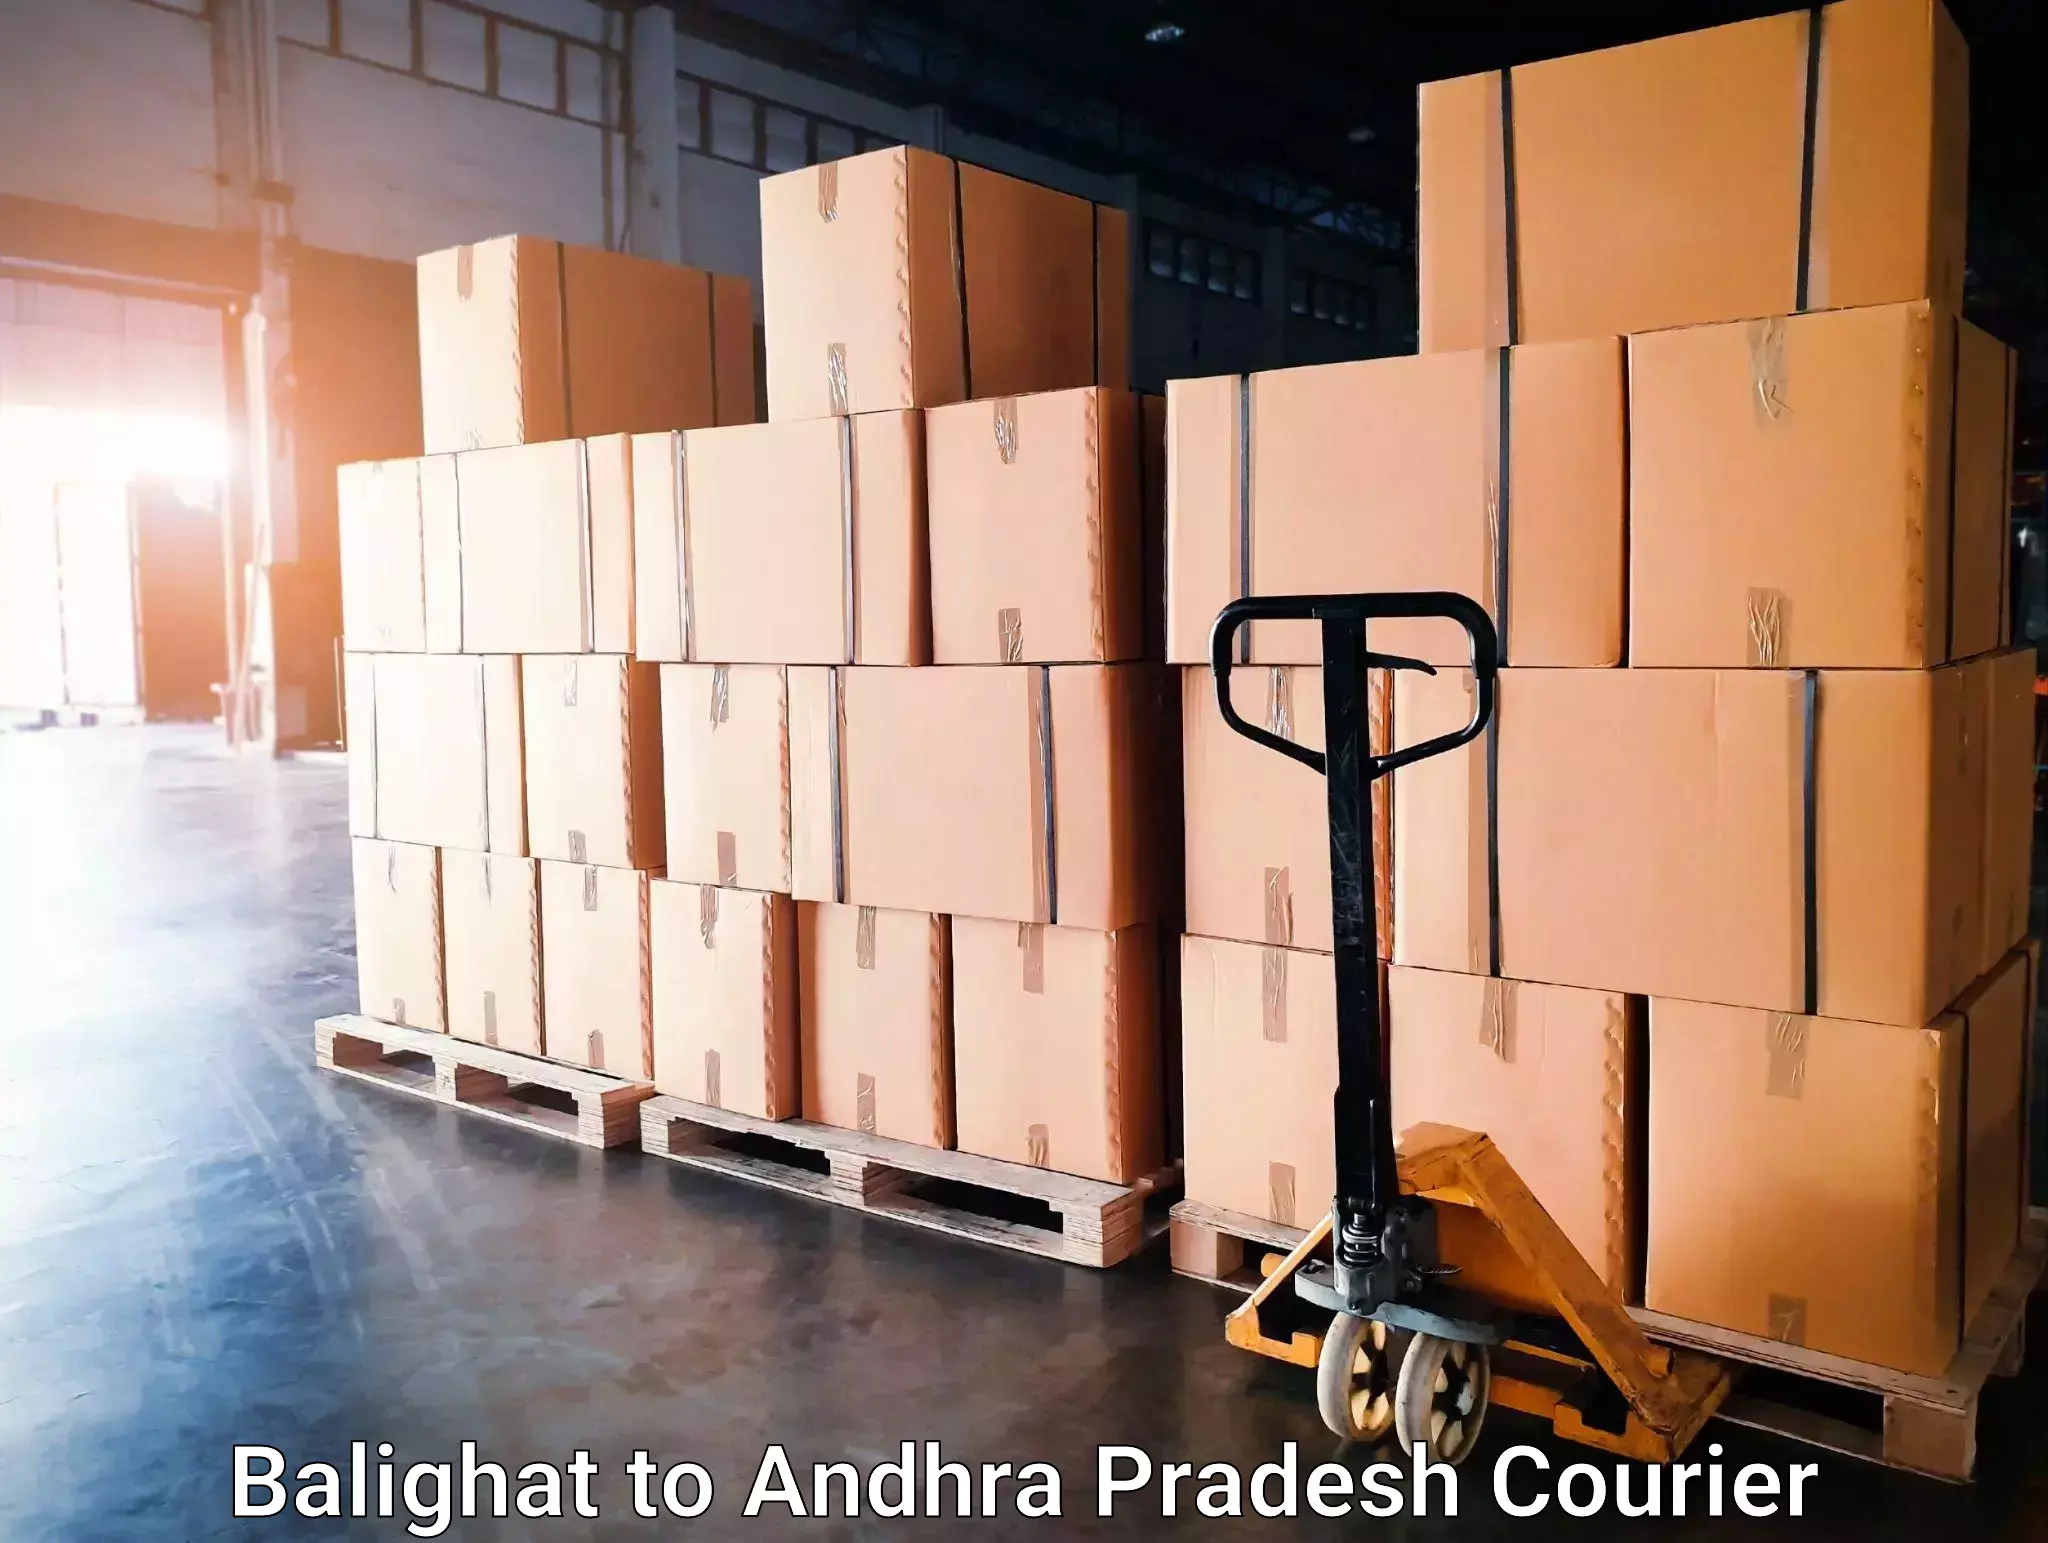 Express delivery capabilities Balighat to Tadipatri